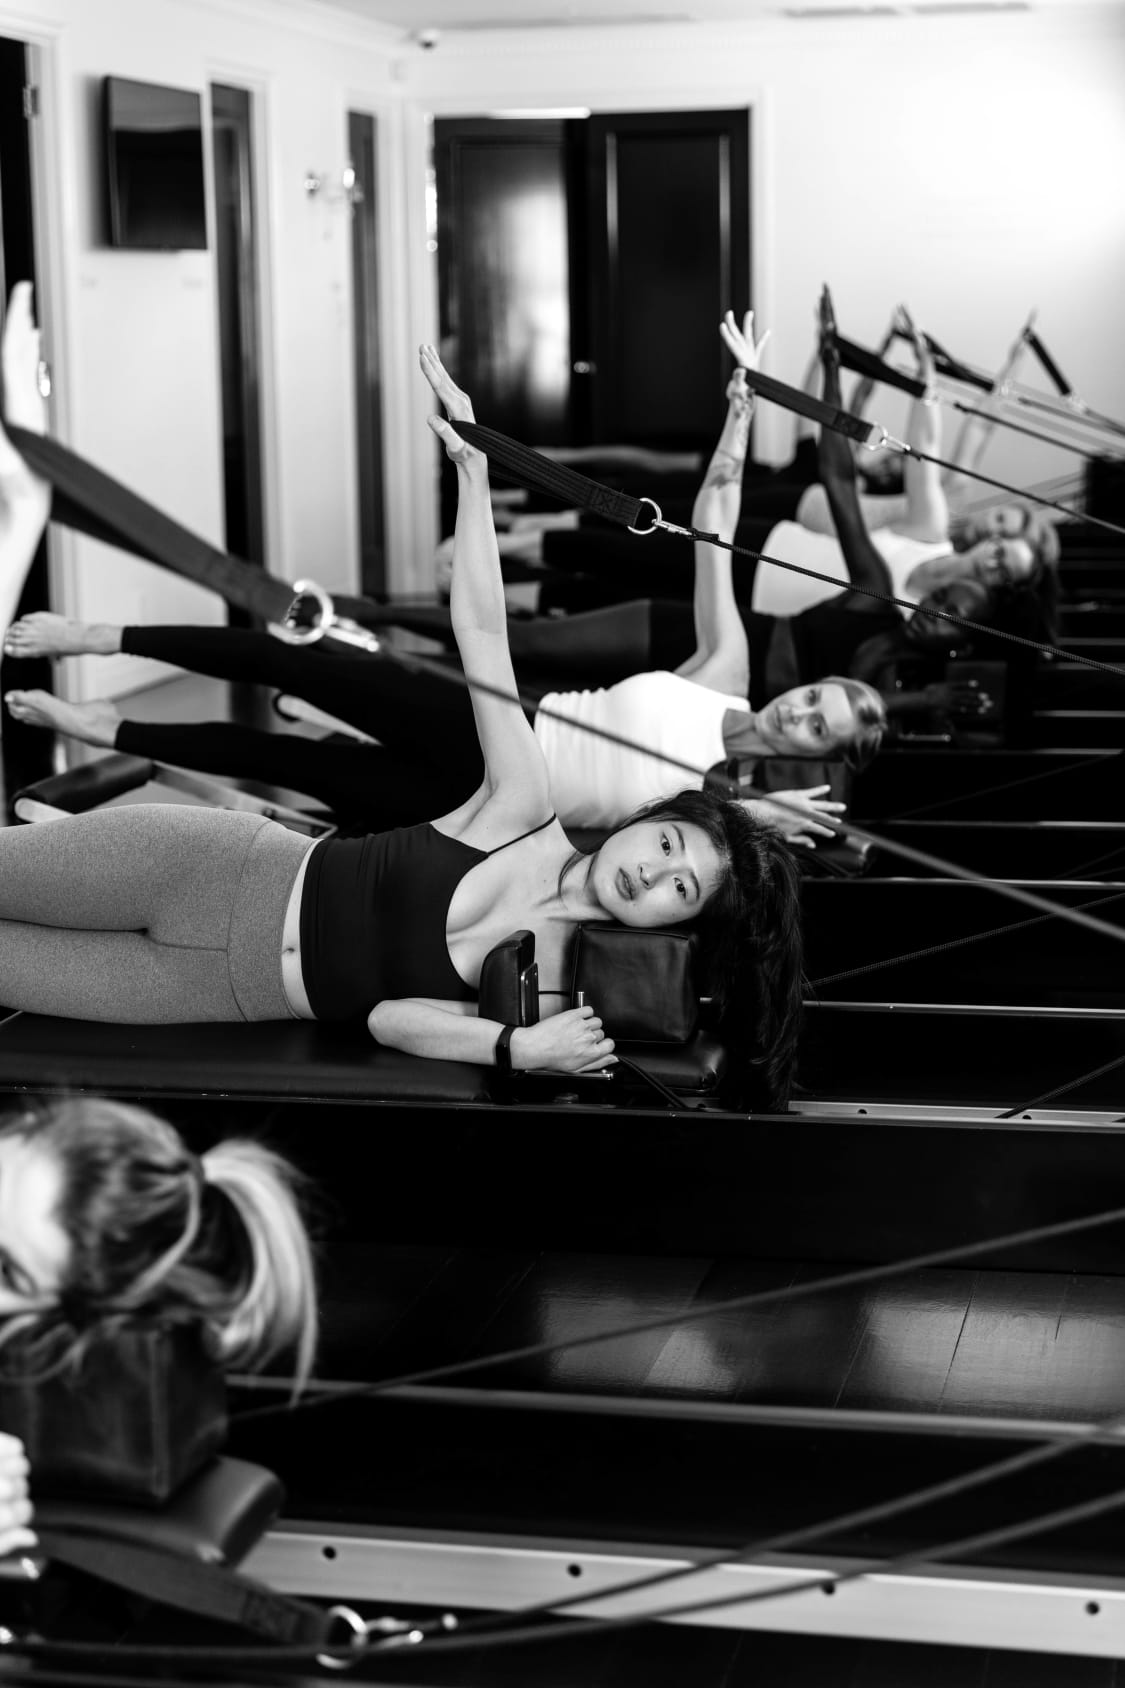 Studio Pilates International - South Slope: Read Reviews and Book Classes  on ClassPass